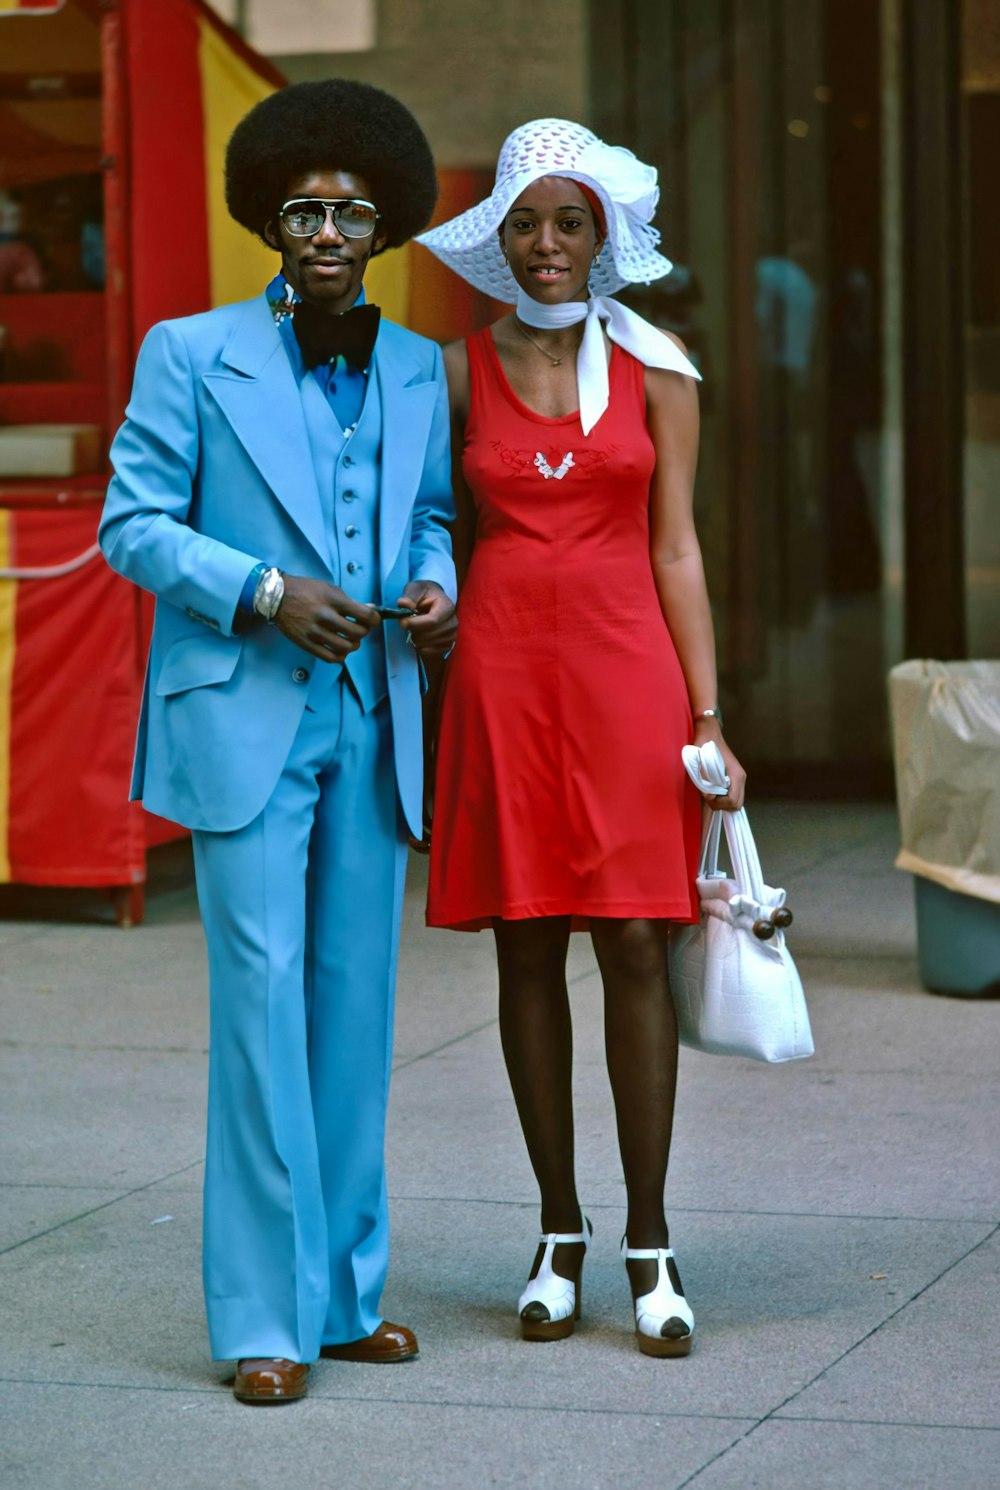 a man and a woman dressed in blue and red